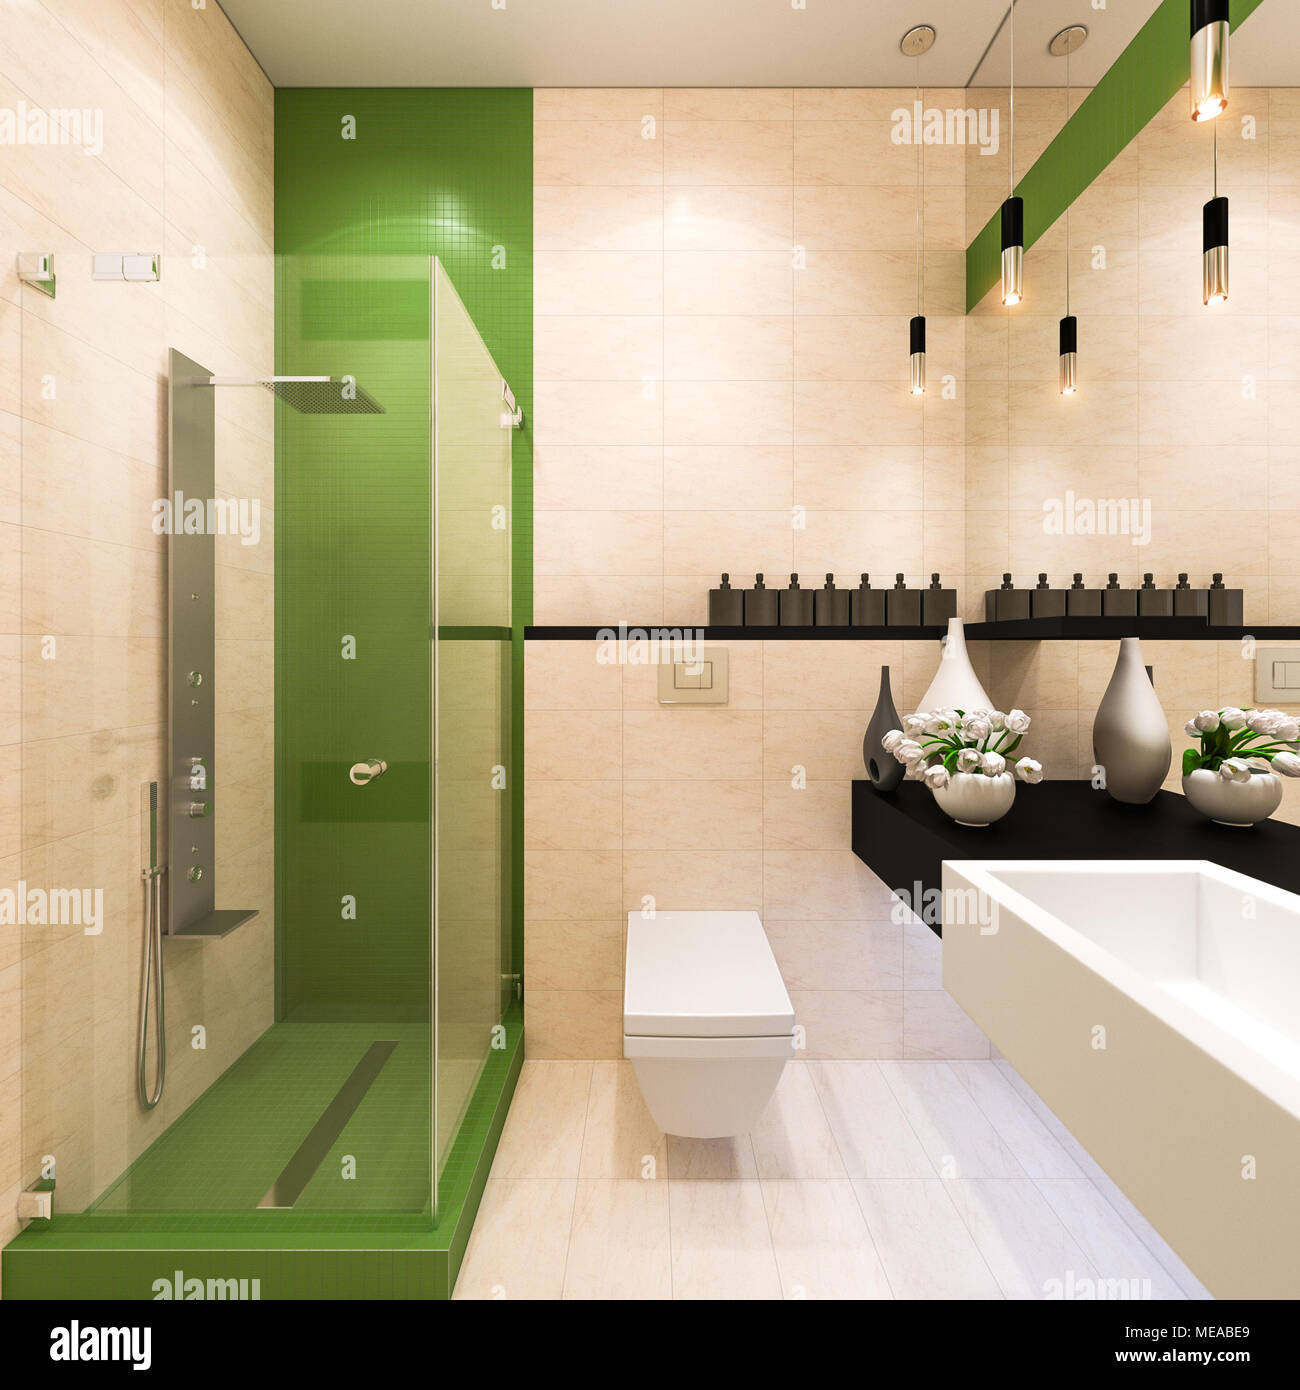 Interior design of the bathroom in a modern architectural style. 3d rendering, 3d illustration of bathroom interior with shower Stock Photo